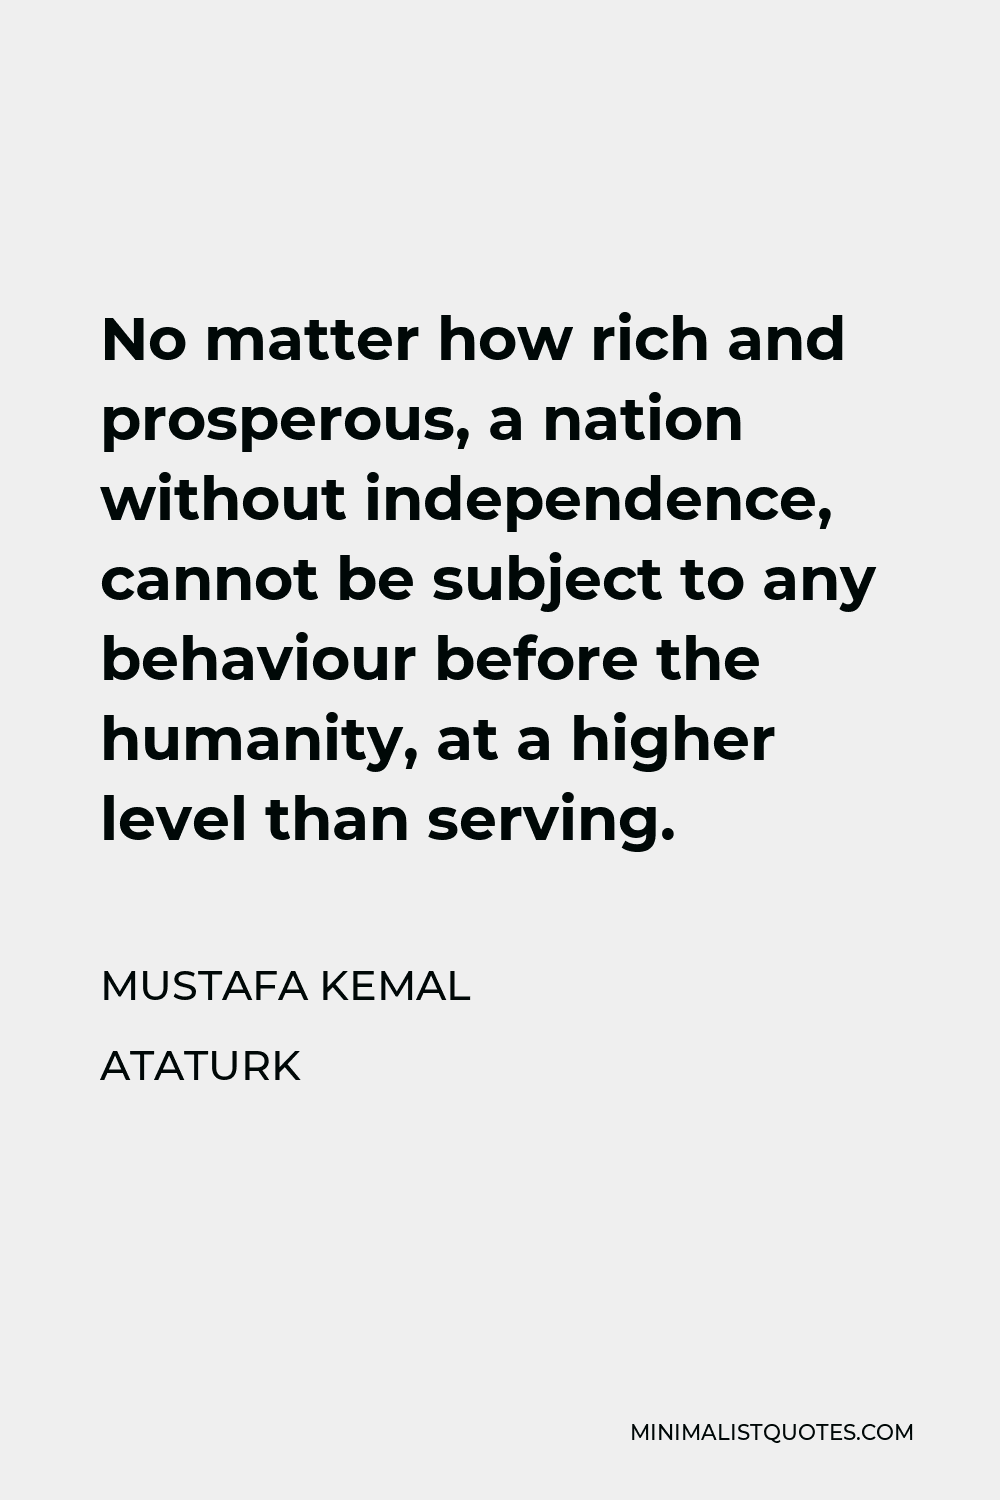 Mustafa Kemal Ataturk Quote - No matter how rich and prosperous, a nation without independence, cannot be subject to any behaviour before the humanity, at a higher level than serving.